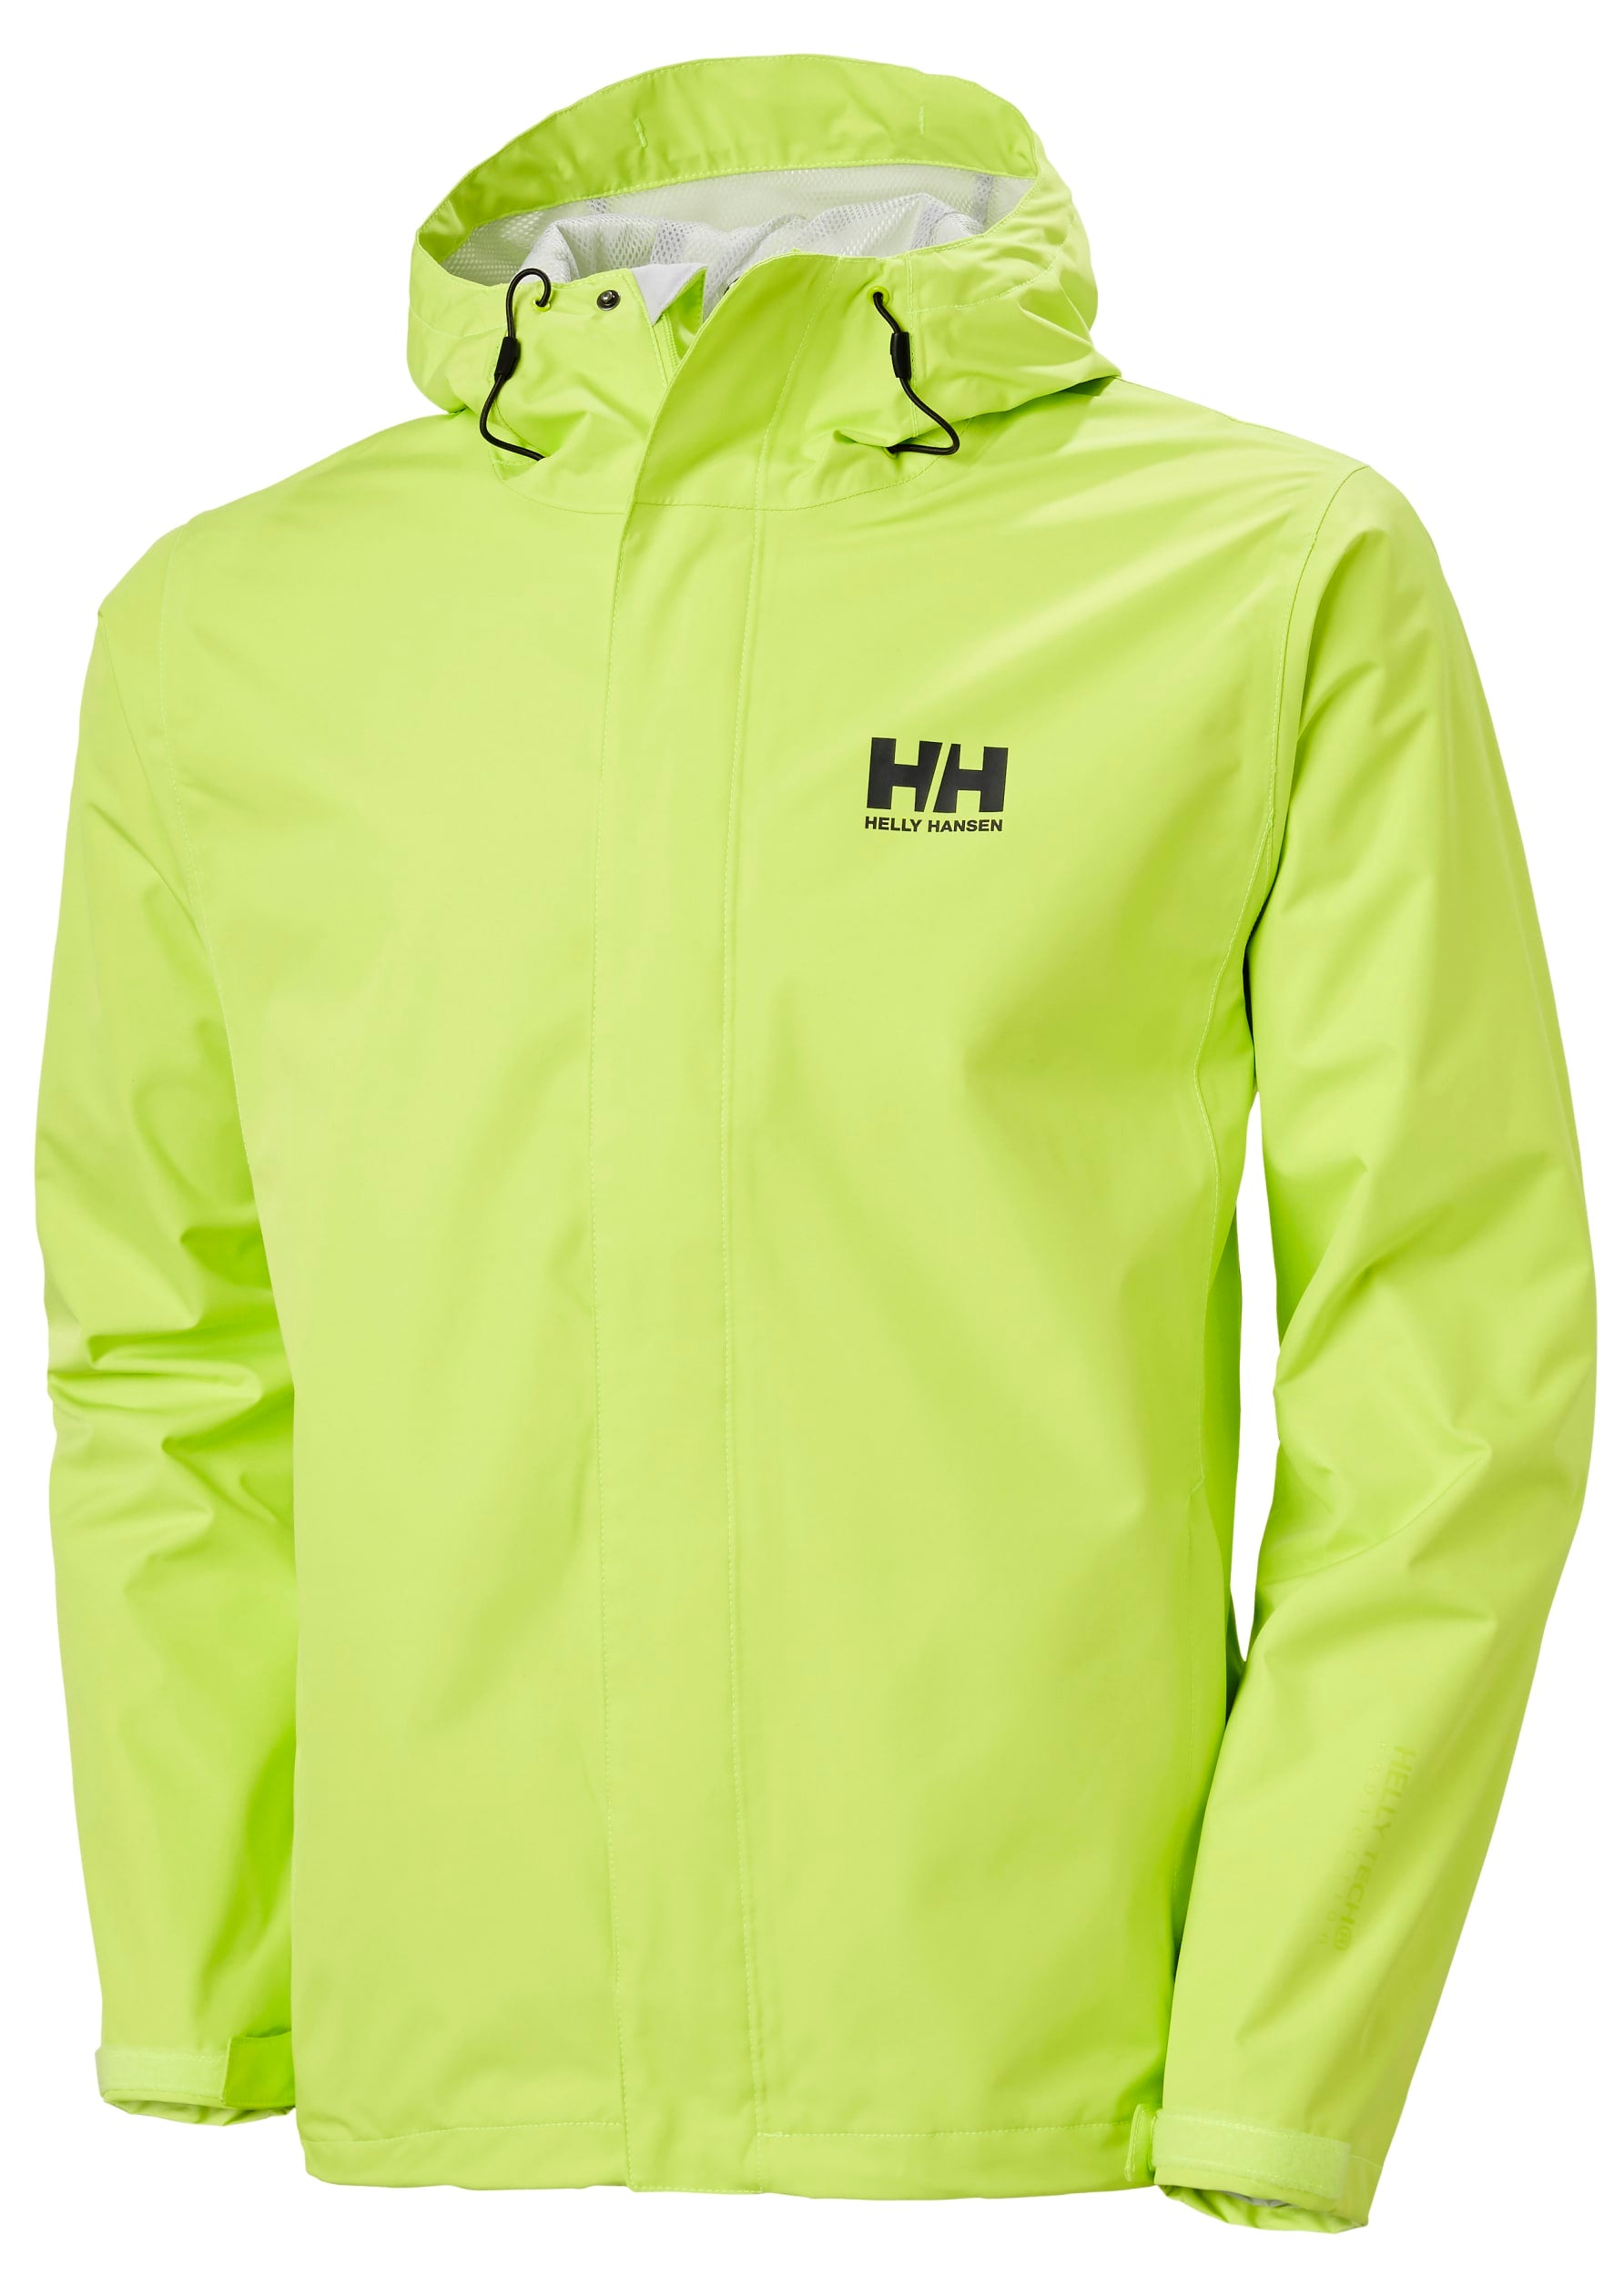 Helly Hansen Men's Seven J Rain Jacket in Azid Lime from the front